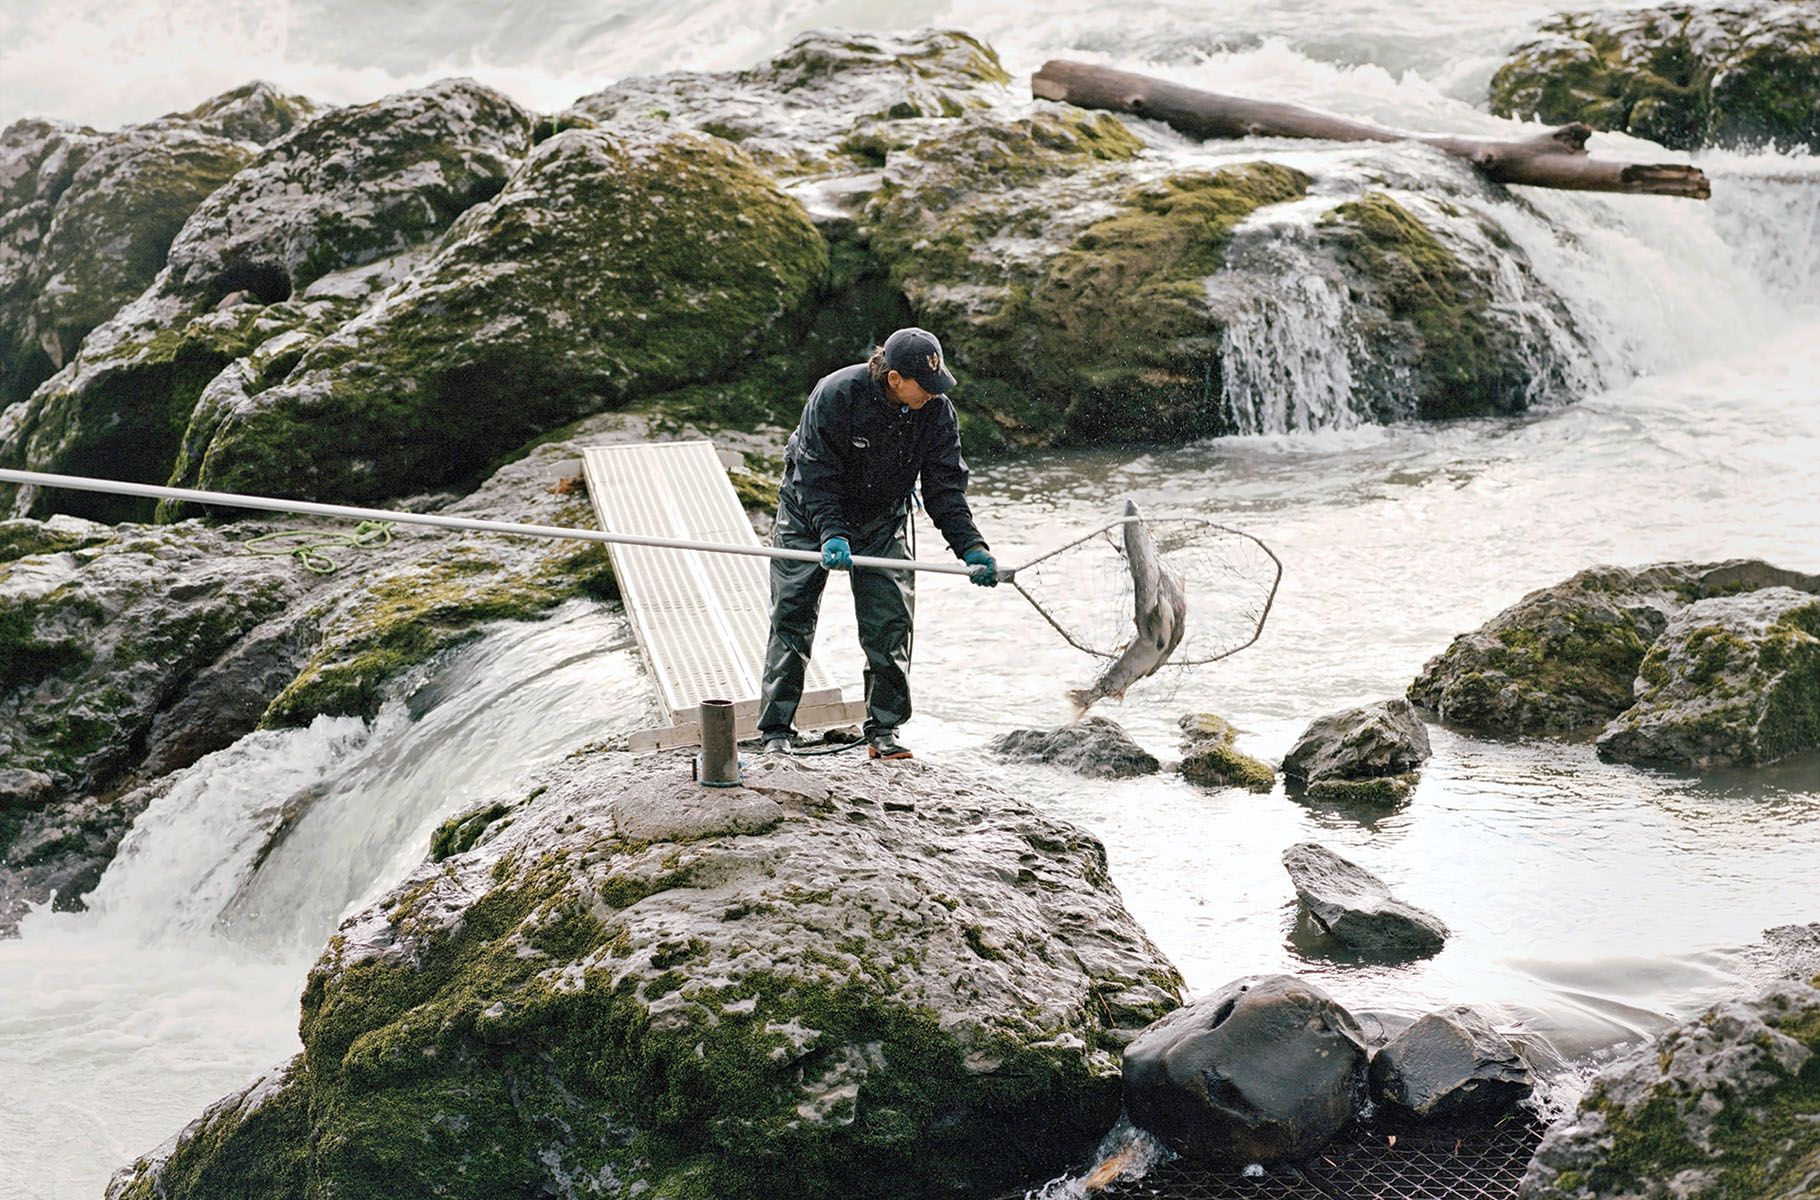 Fabian Alfred counts sockeye salmon on the Bulkley River on Aug. 4, 2017. The Wetsuweten people monitor the traditional dip-netting spots to check the salmon run’s population and health. Image by Jim McAuley. Canada, 2017.